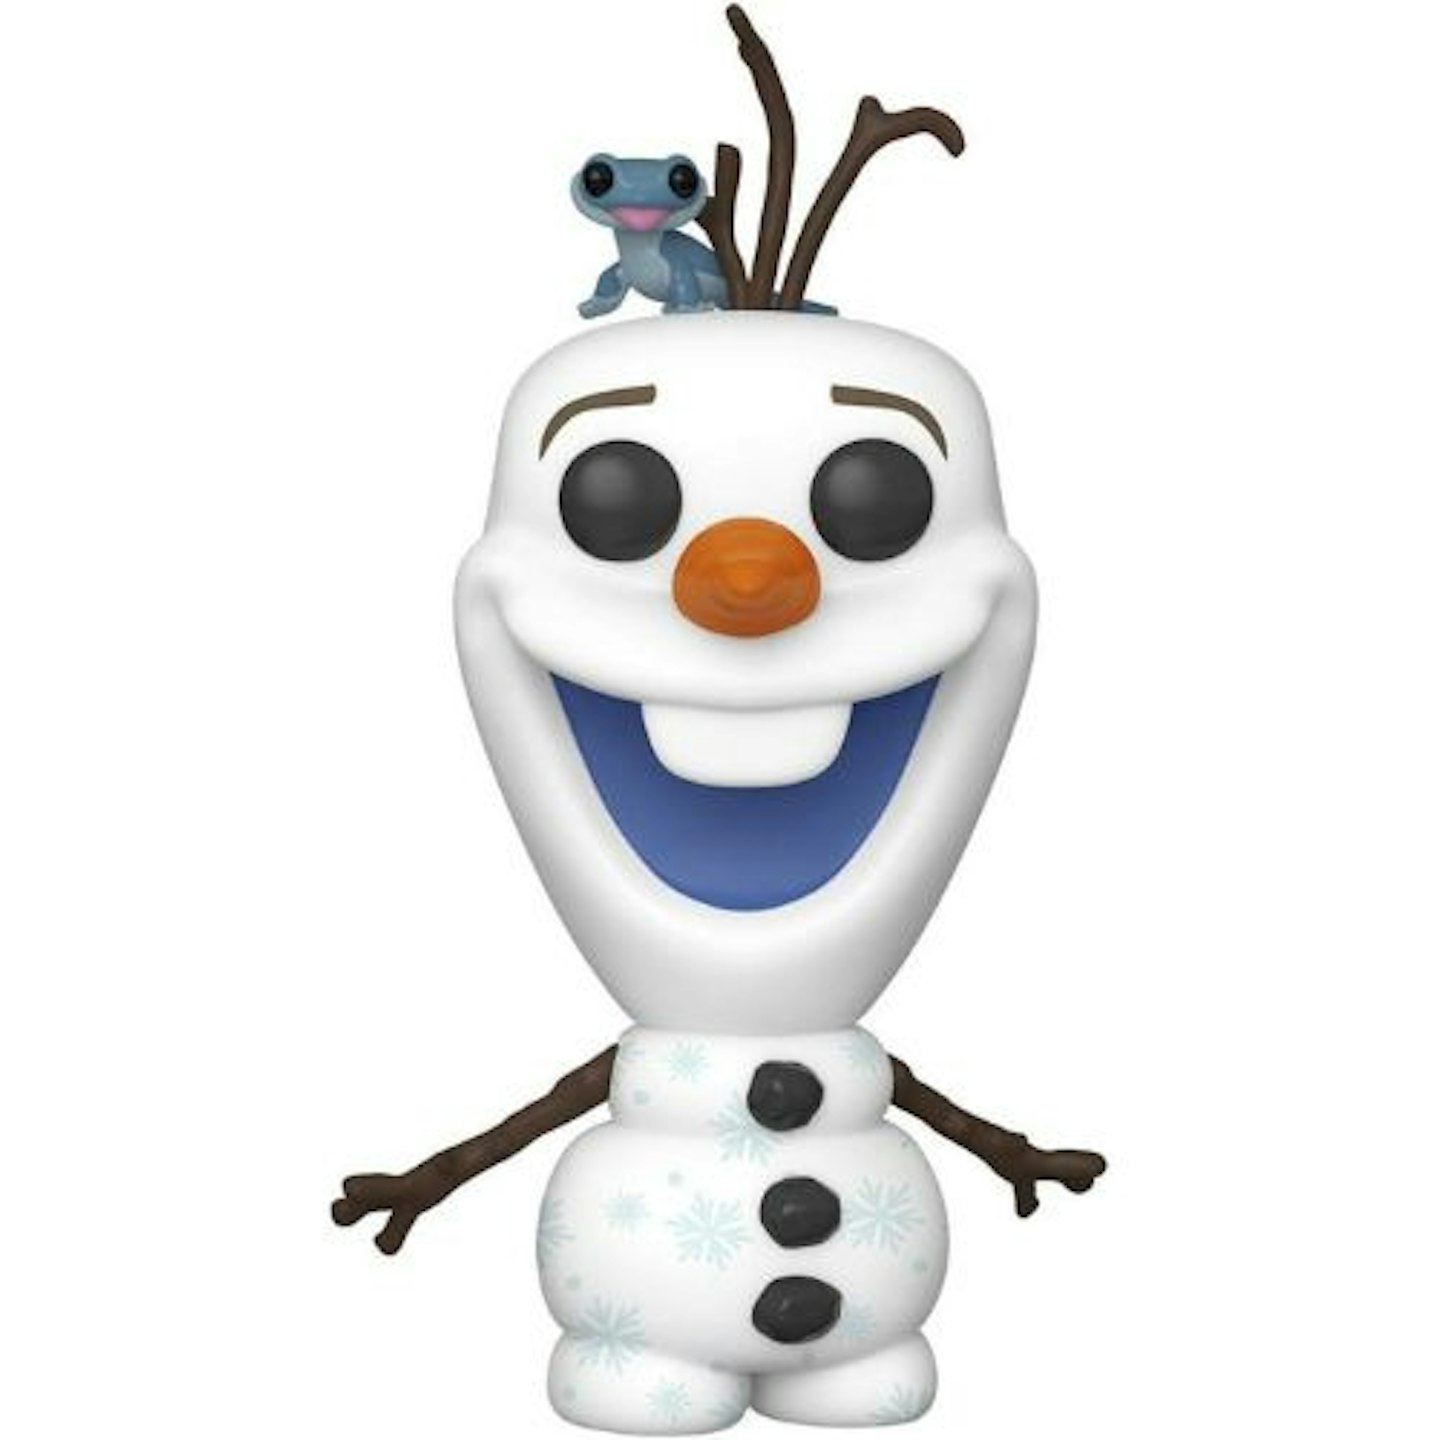 Disney Frozen 8″ Talking Plush Olaf ( Batteries may not work, due to age,  sold as plush toy ) – Gift To Gadget